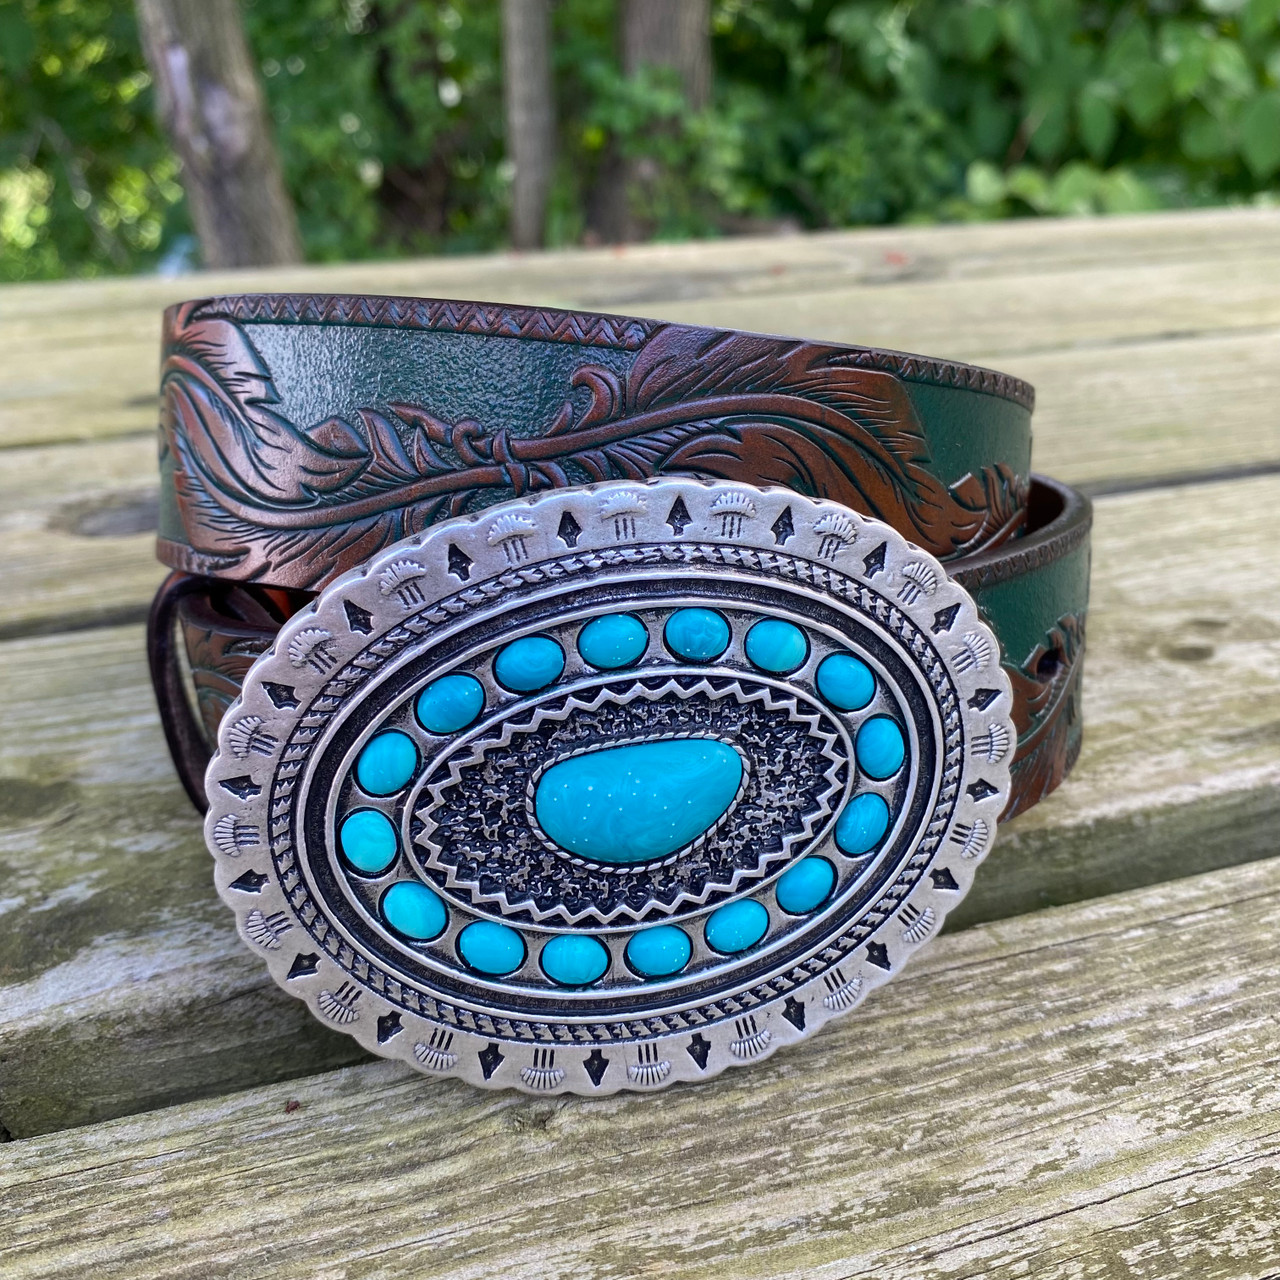 Women's Leather Belt with Turquoise Stone Buckle